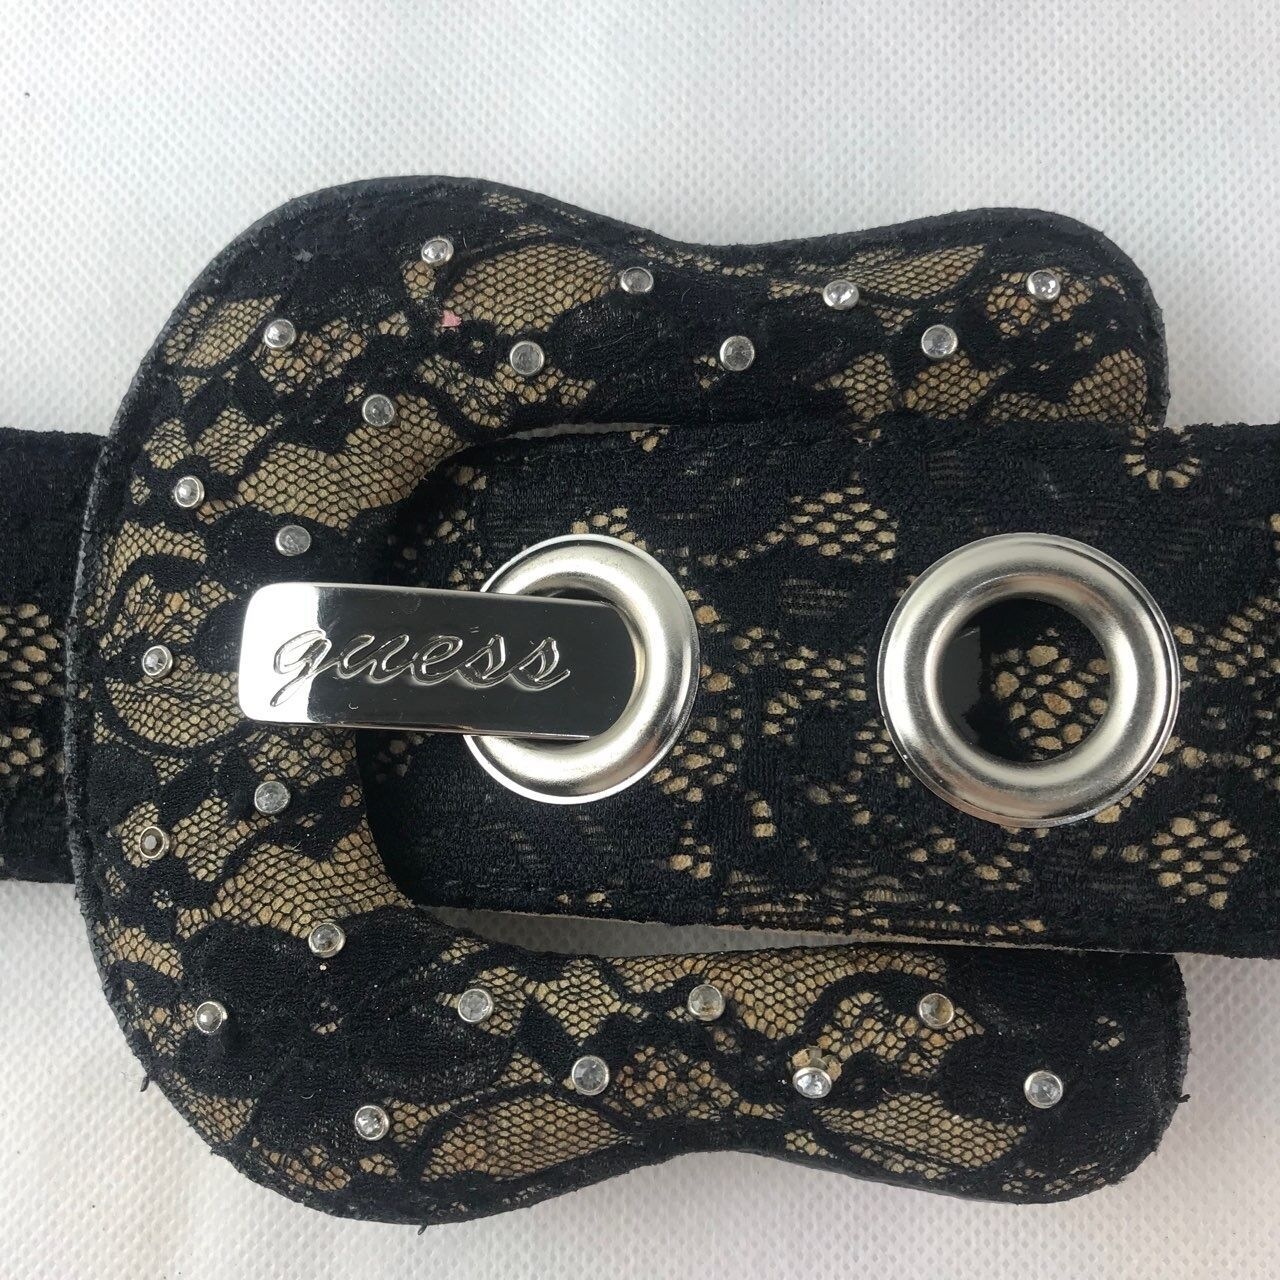 Guess Lace Belt with Large Buckle